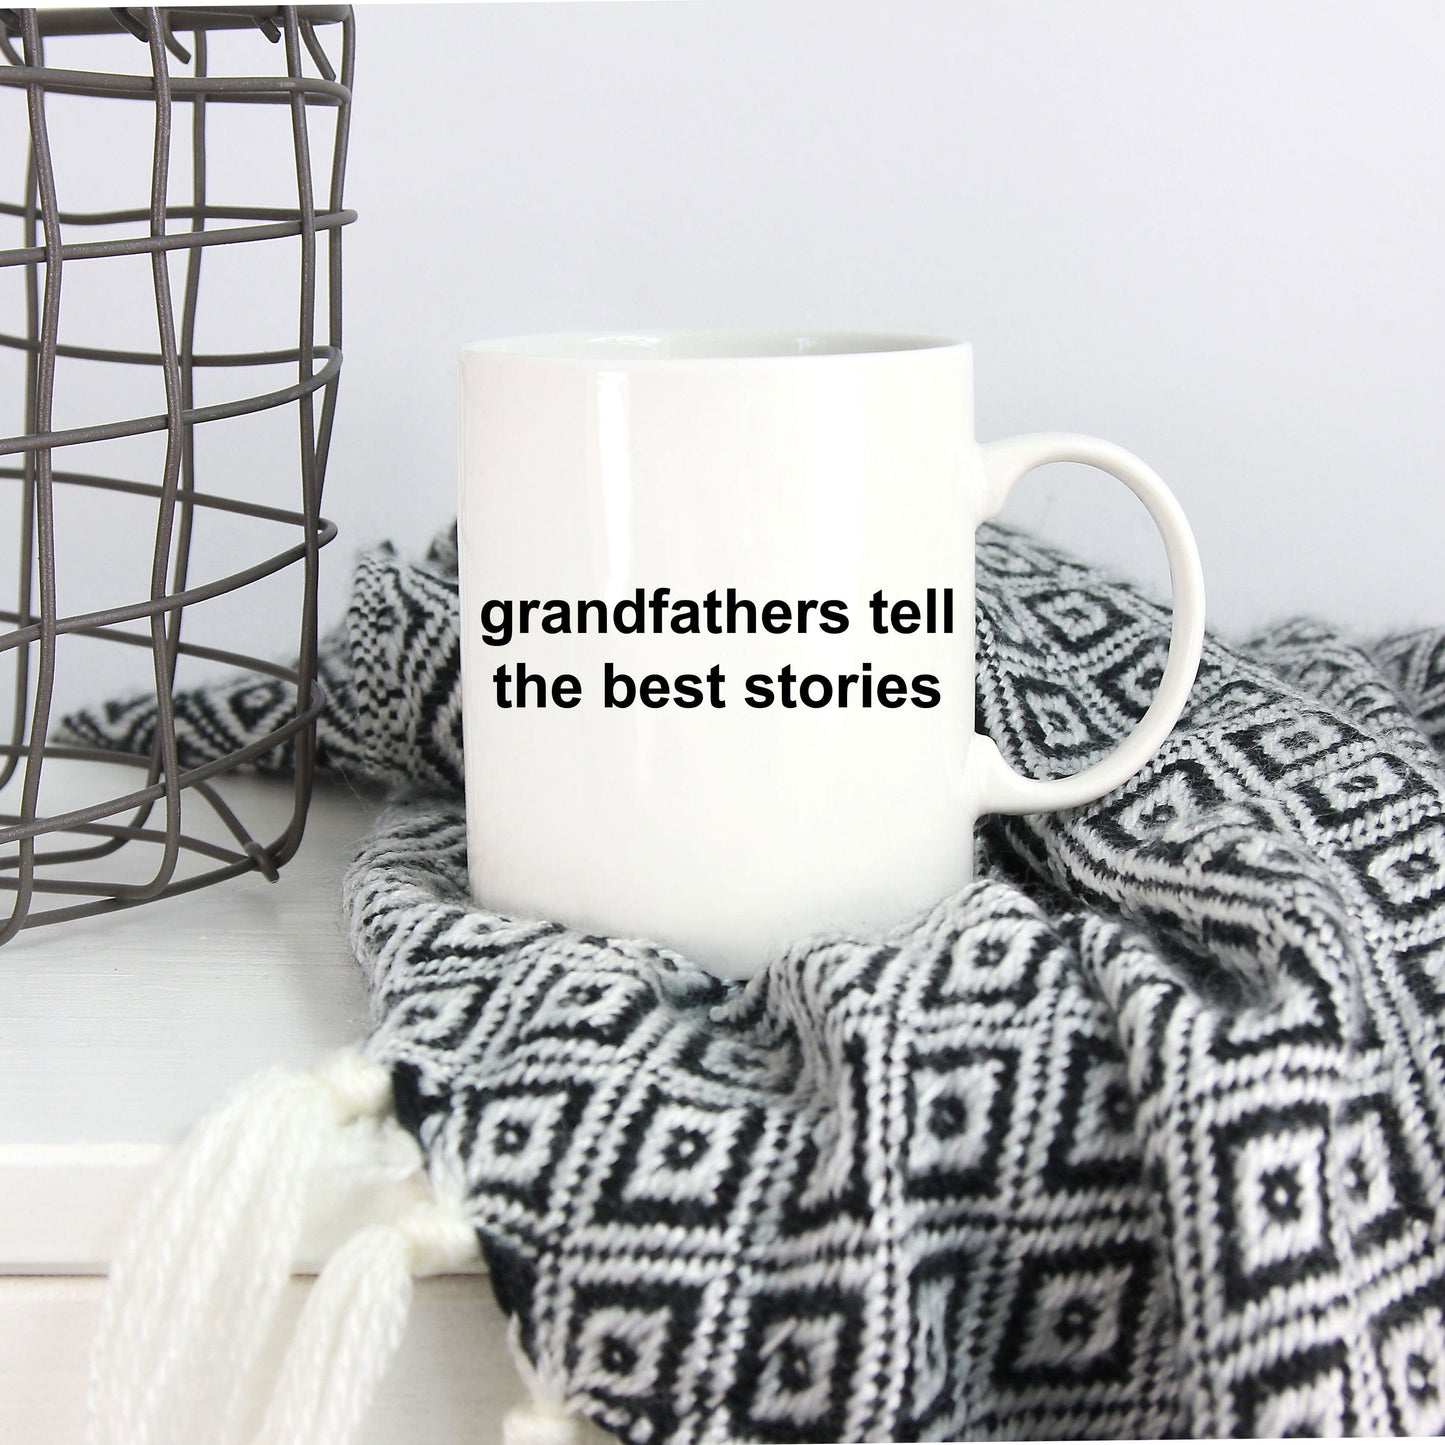 Grandfathers Tell the Best Stories Coffee Mug Makes a Great Gift for Father's Day or a Birthday